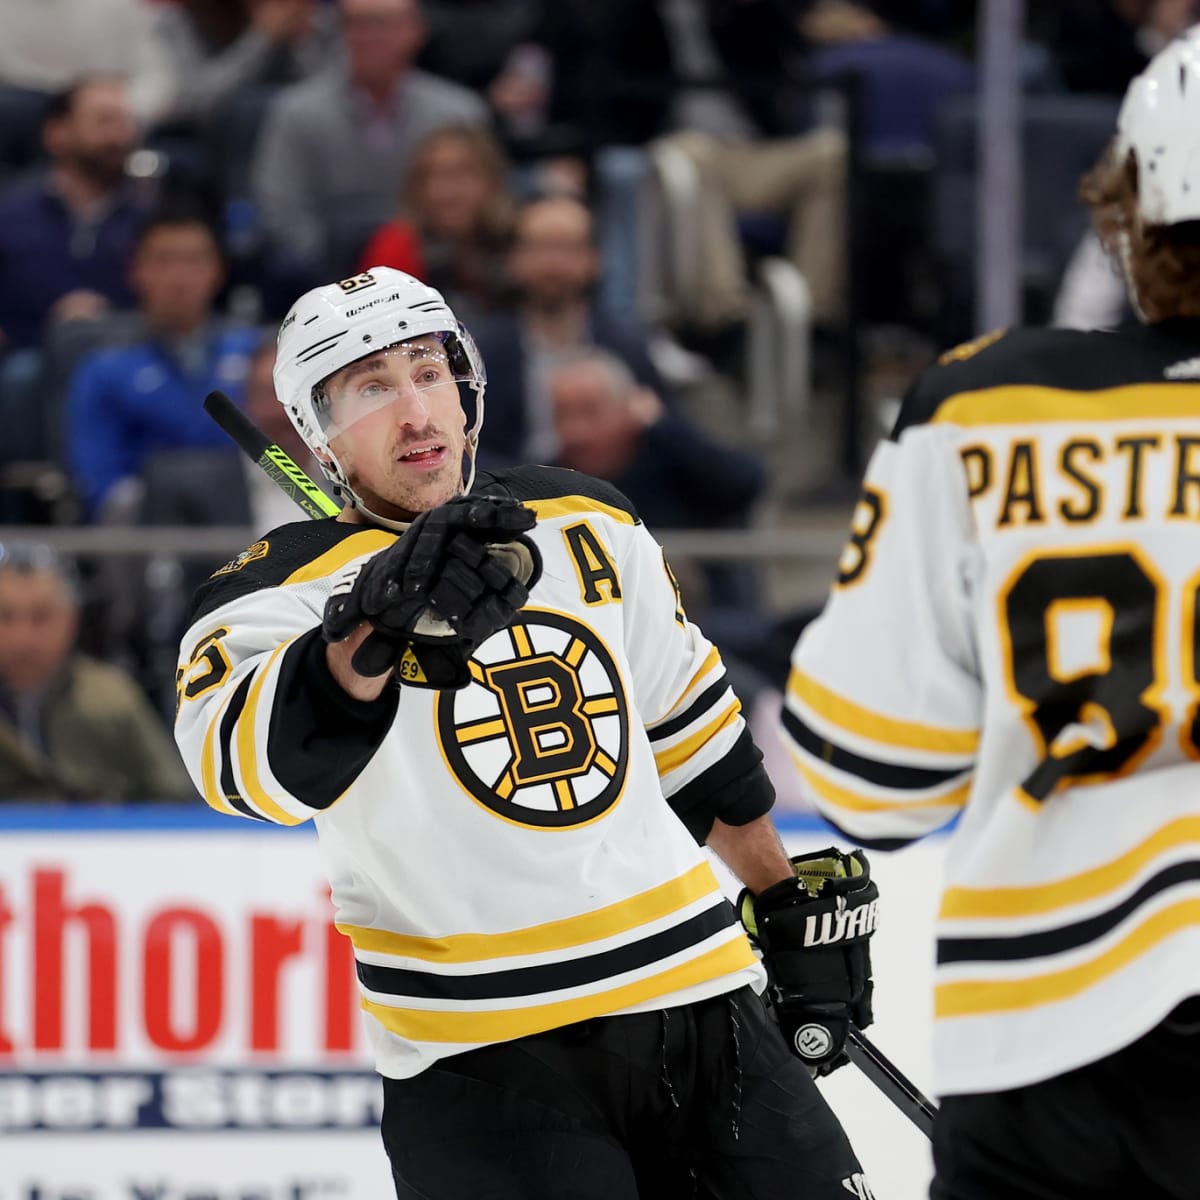 PREVIEW: Boston Bruins host St. Louis Blues for Game 1 of the